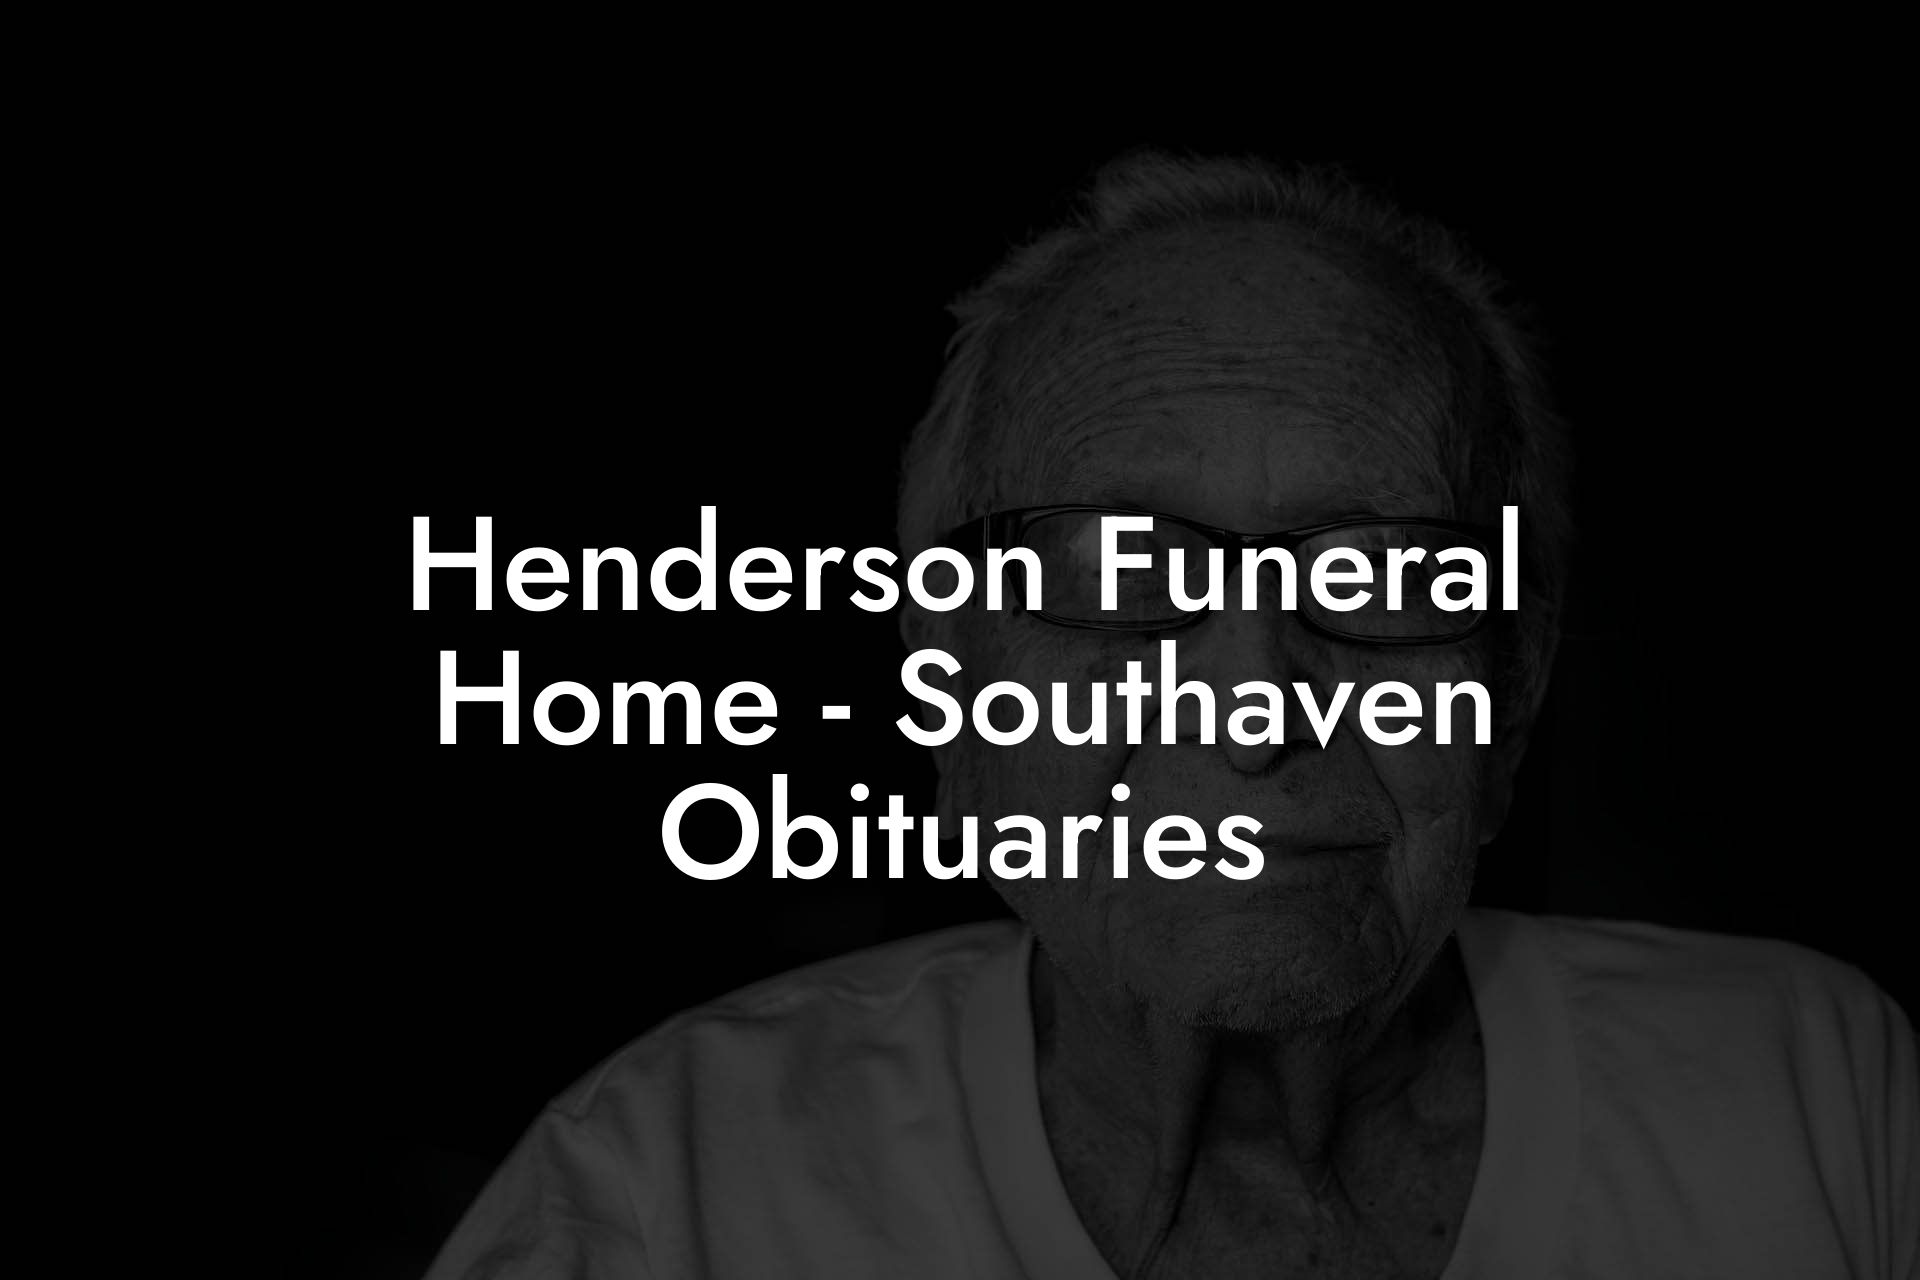 Henderson Funeral Home - Southaven Obituaries